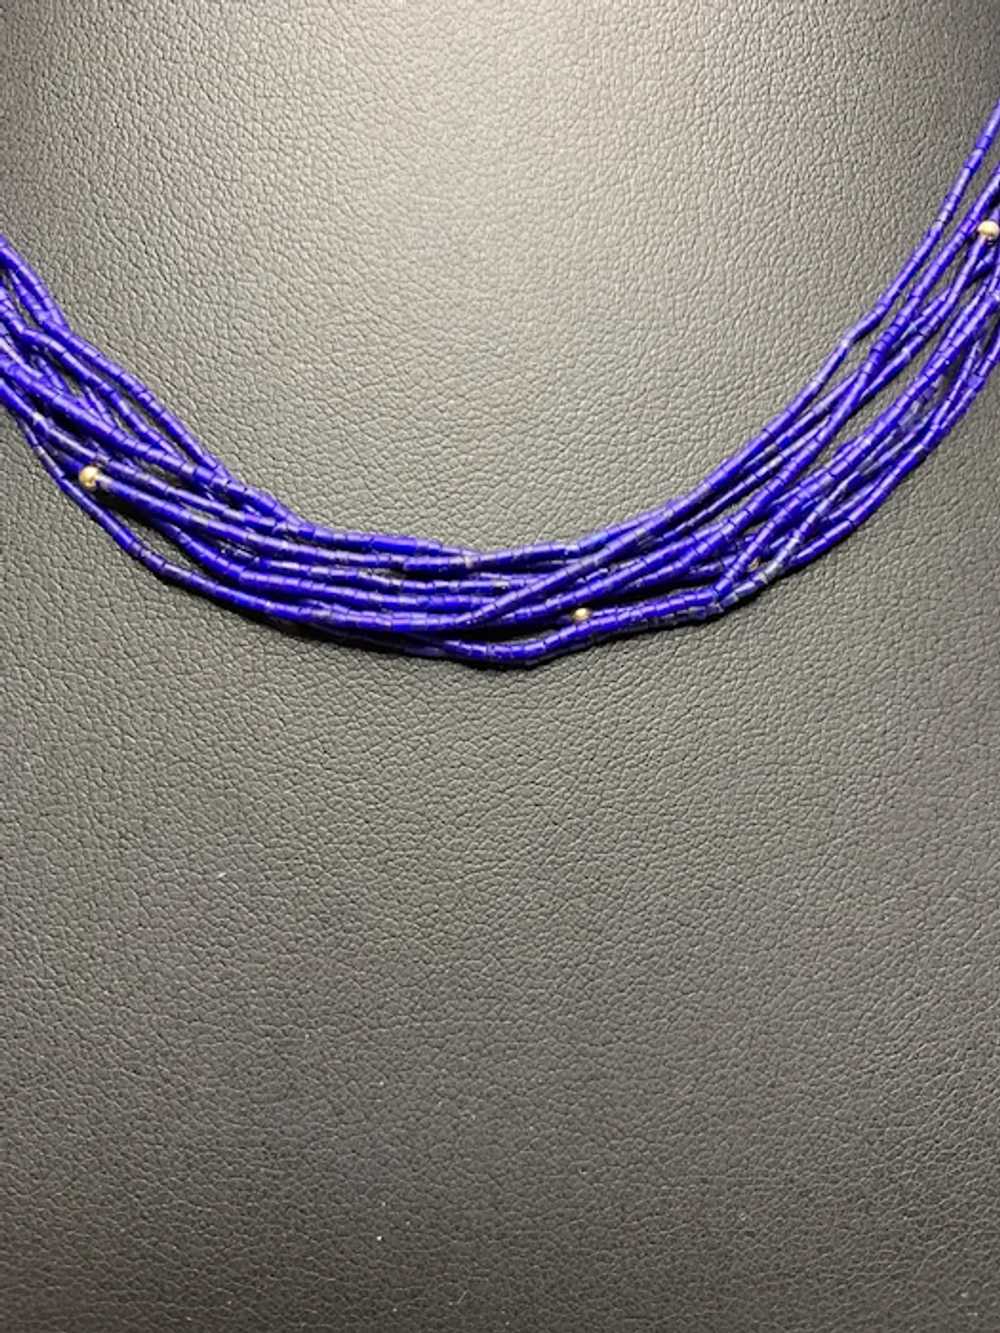 Ten Strands of Lapis and 14k Gold Necklace - image 4